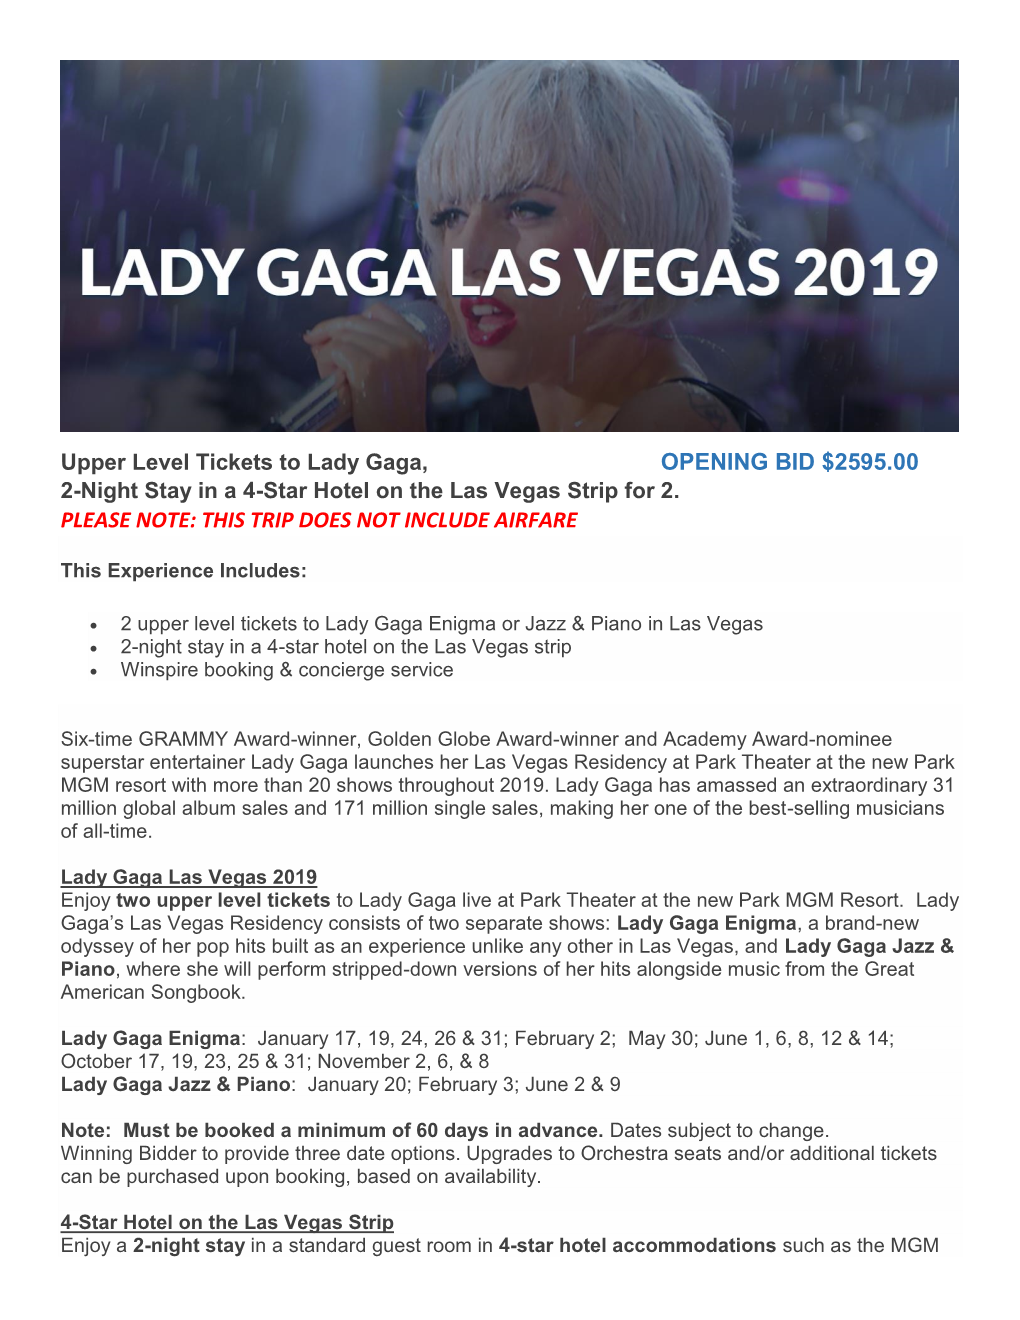 Lady Gaga Las Vegas 2019 Enjoy Two Upper Level Tickets to Lady Gaga Live at Park Theater at the New Park MGM Resort